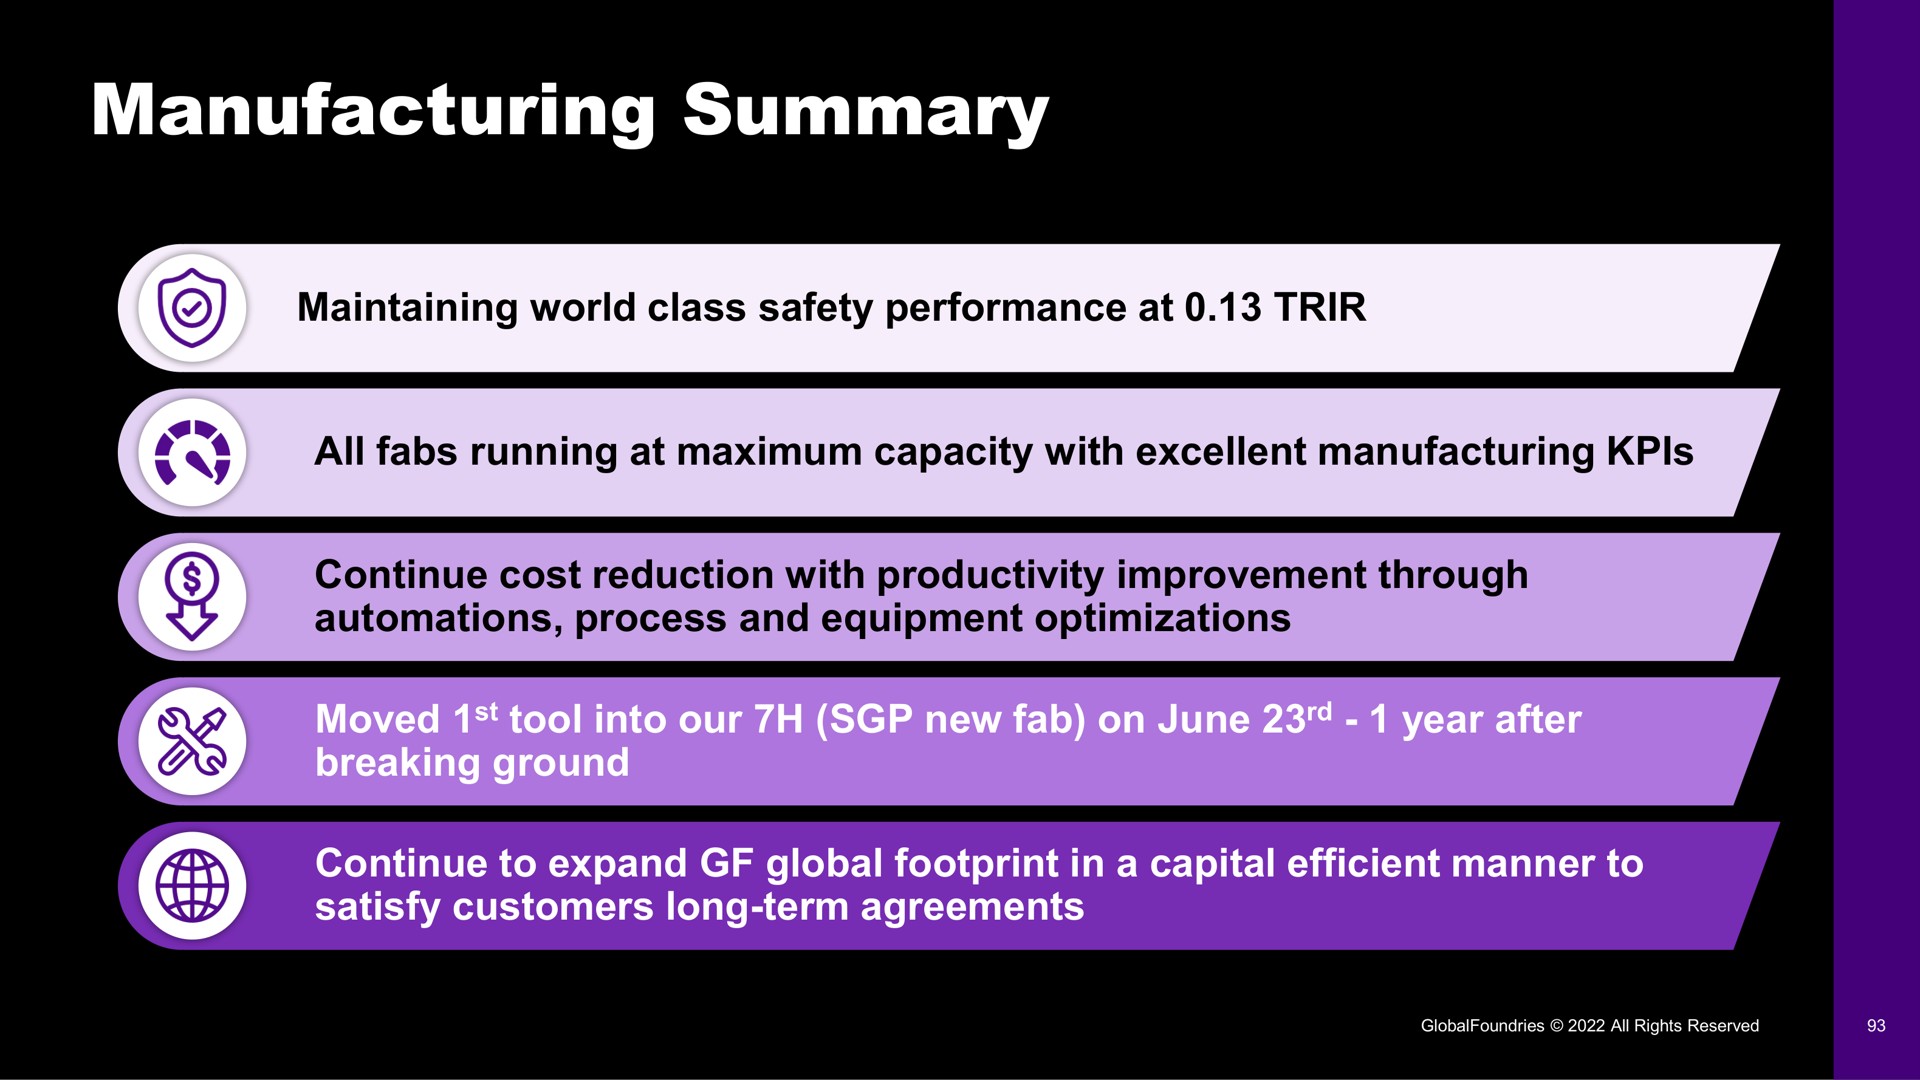 manufacturing summary | GlobalFoundries